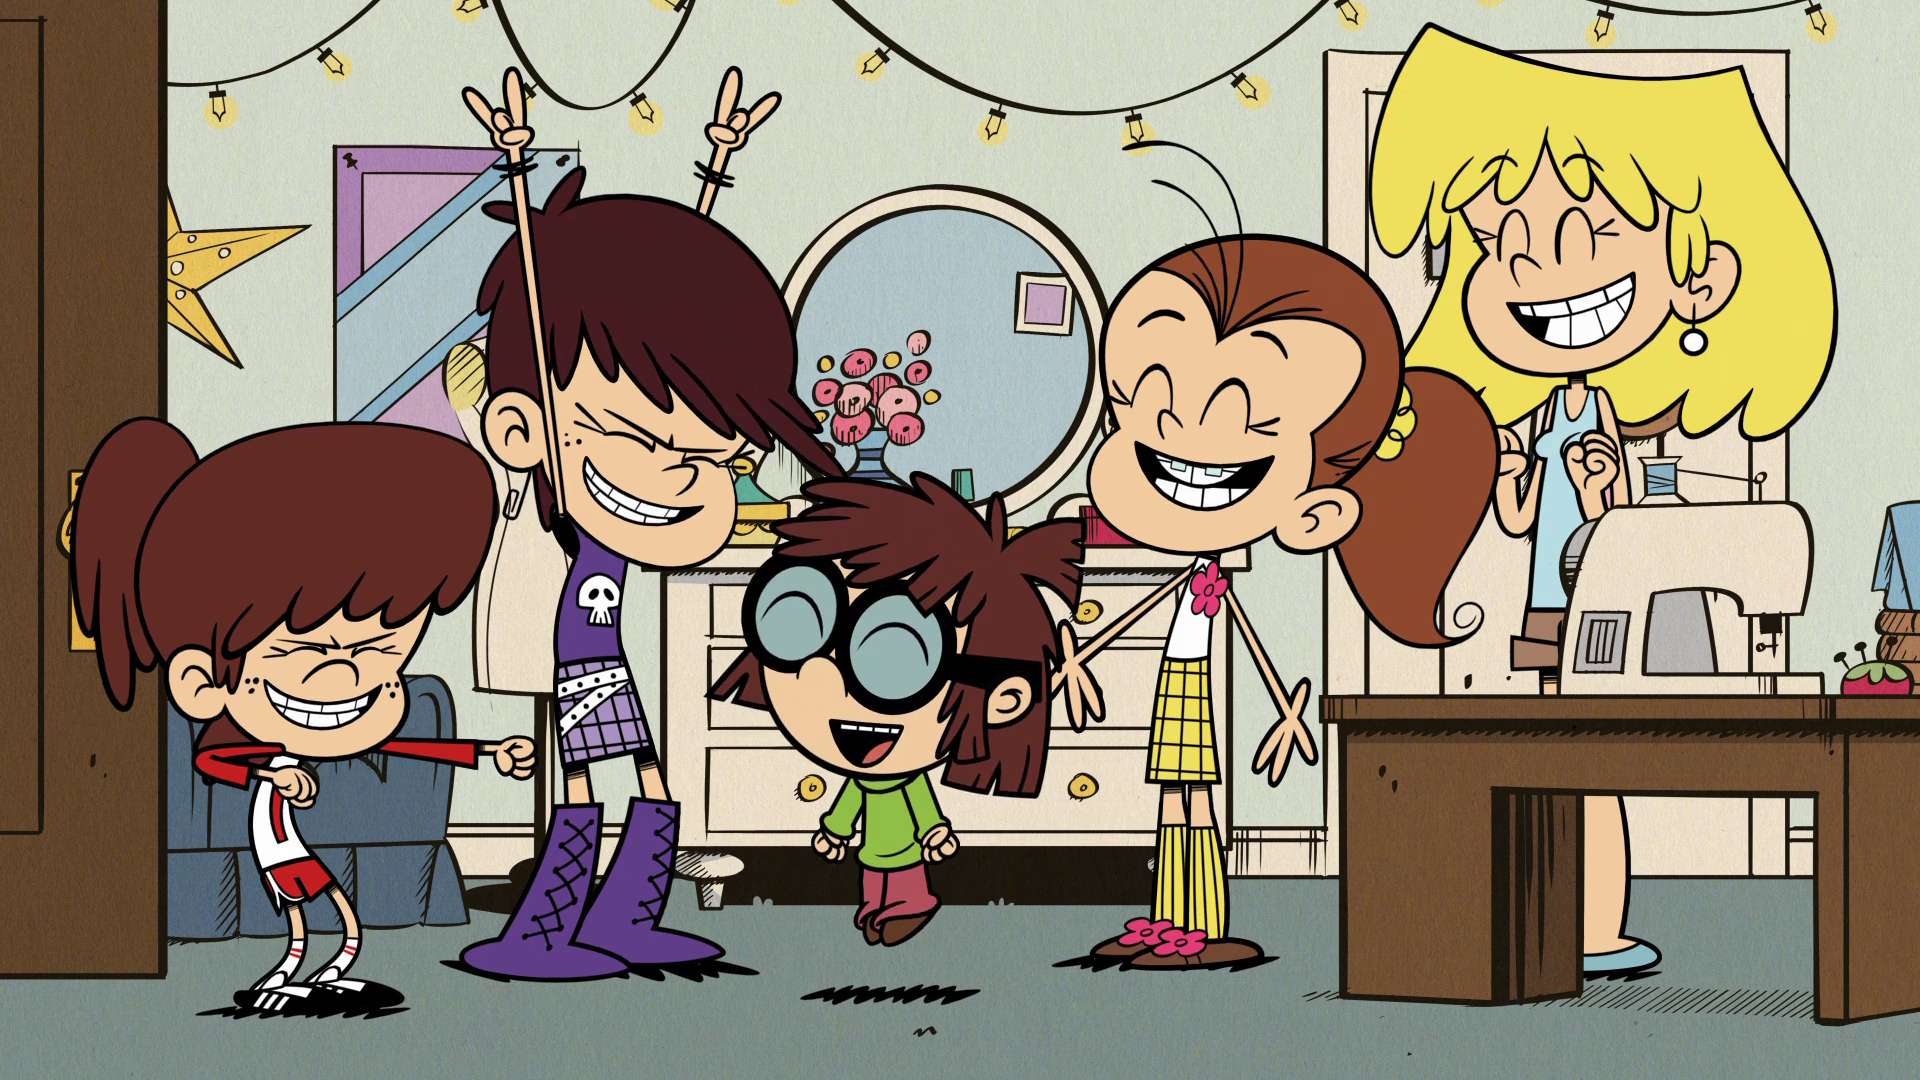 Image S2e12b Excitedpng The Loud House Encyclopedia Fandom Powered By Wikia 